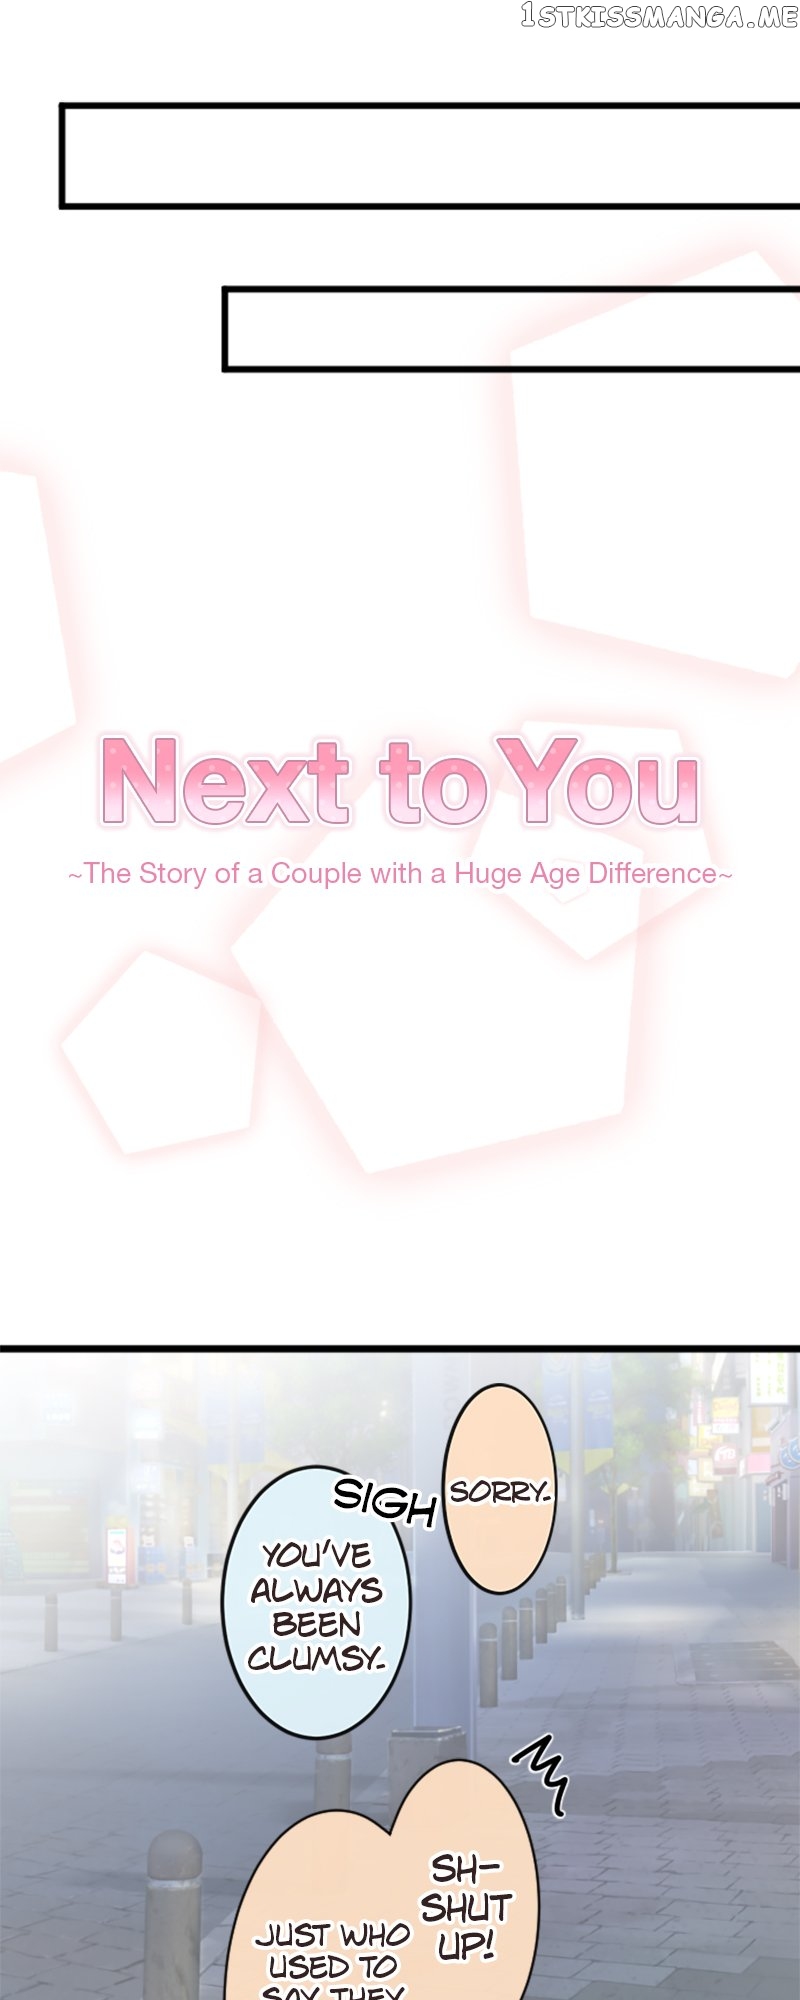 Next to You ~The Story of a Couple with a Huge Age Difference~ Chapter 94 - p2.10 - page 8